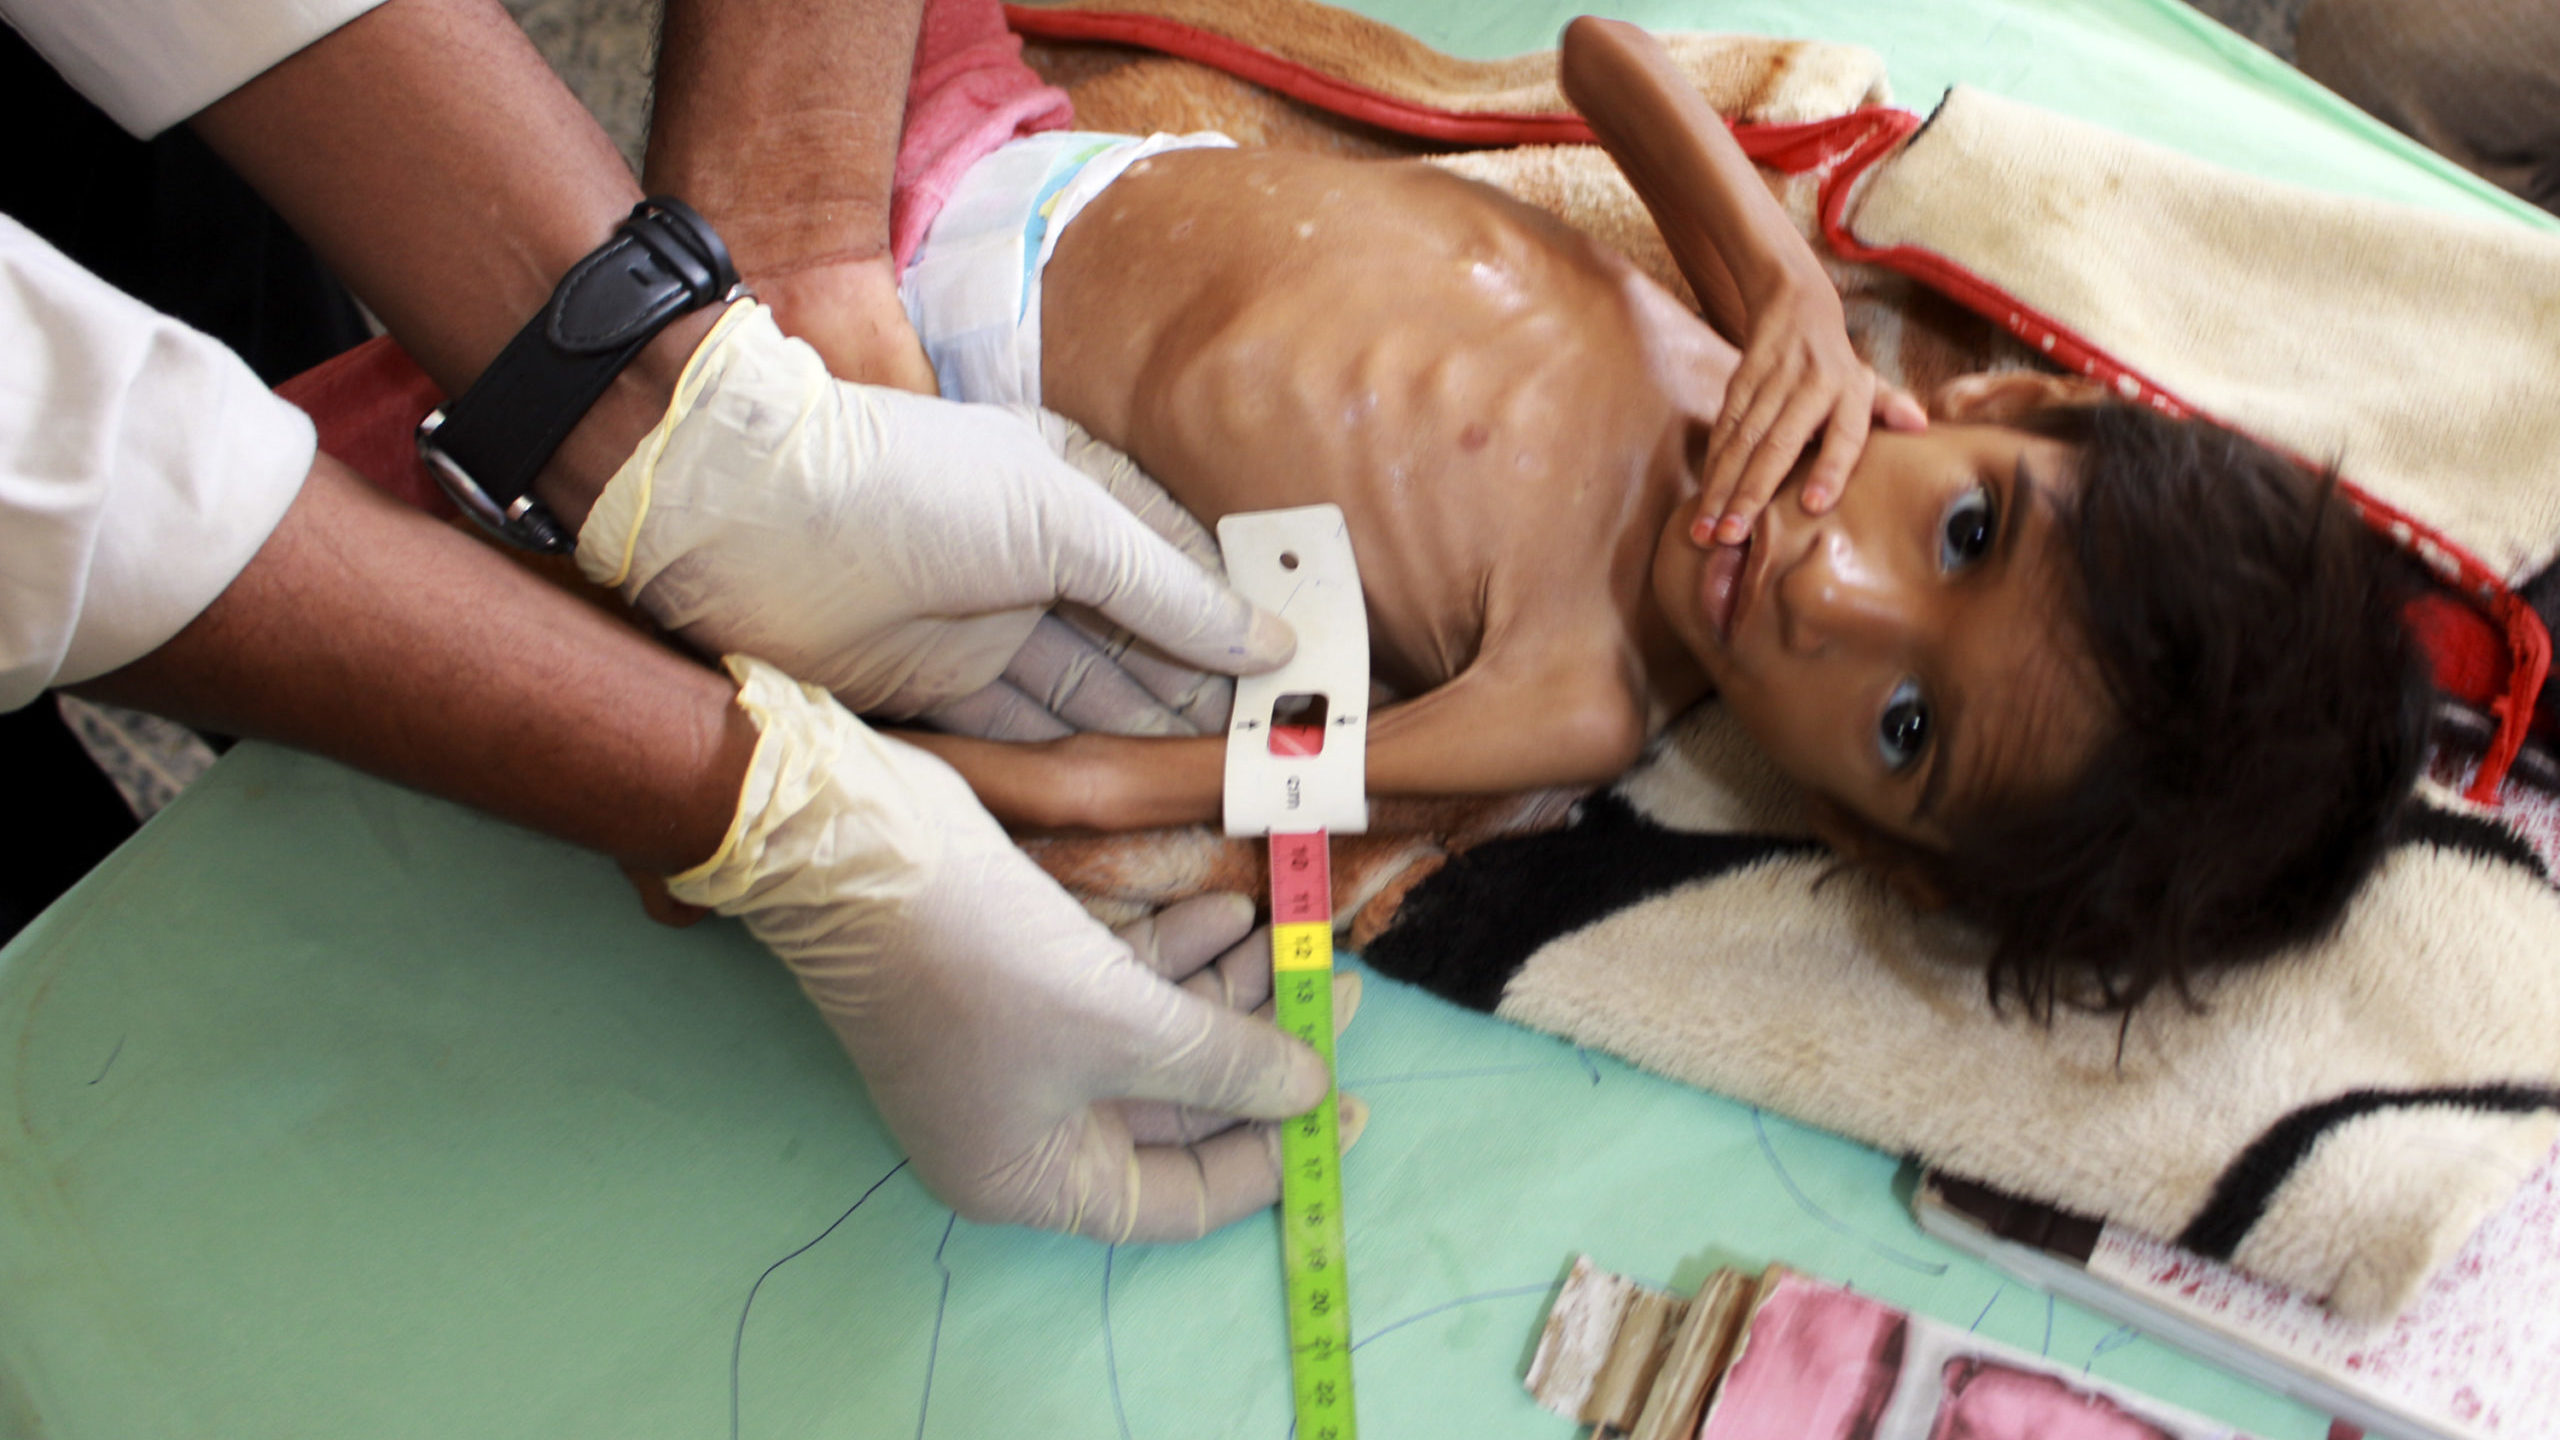 UN Trying To Raise $4.3 Billion To Stop Hunger in Yemen